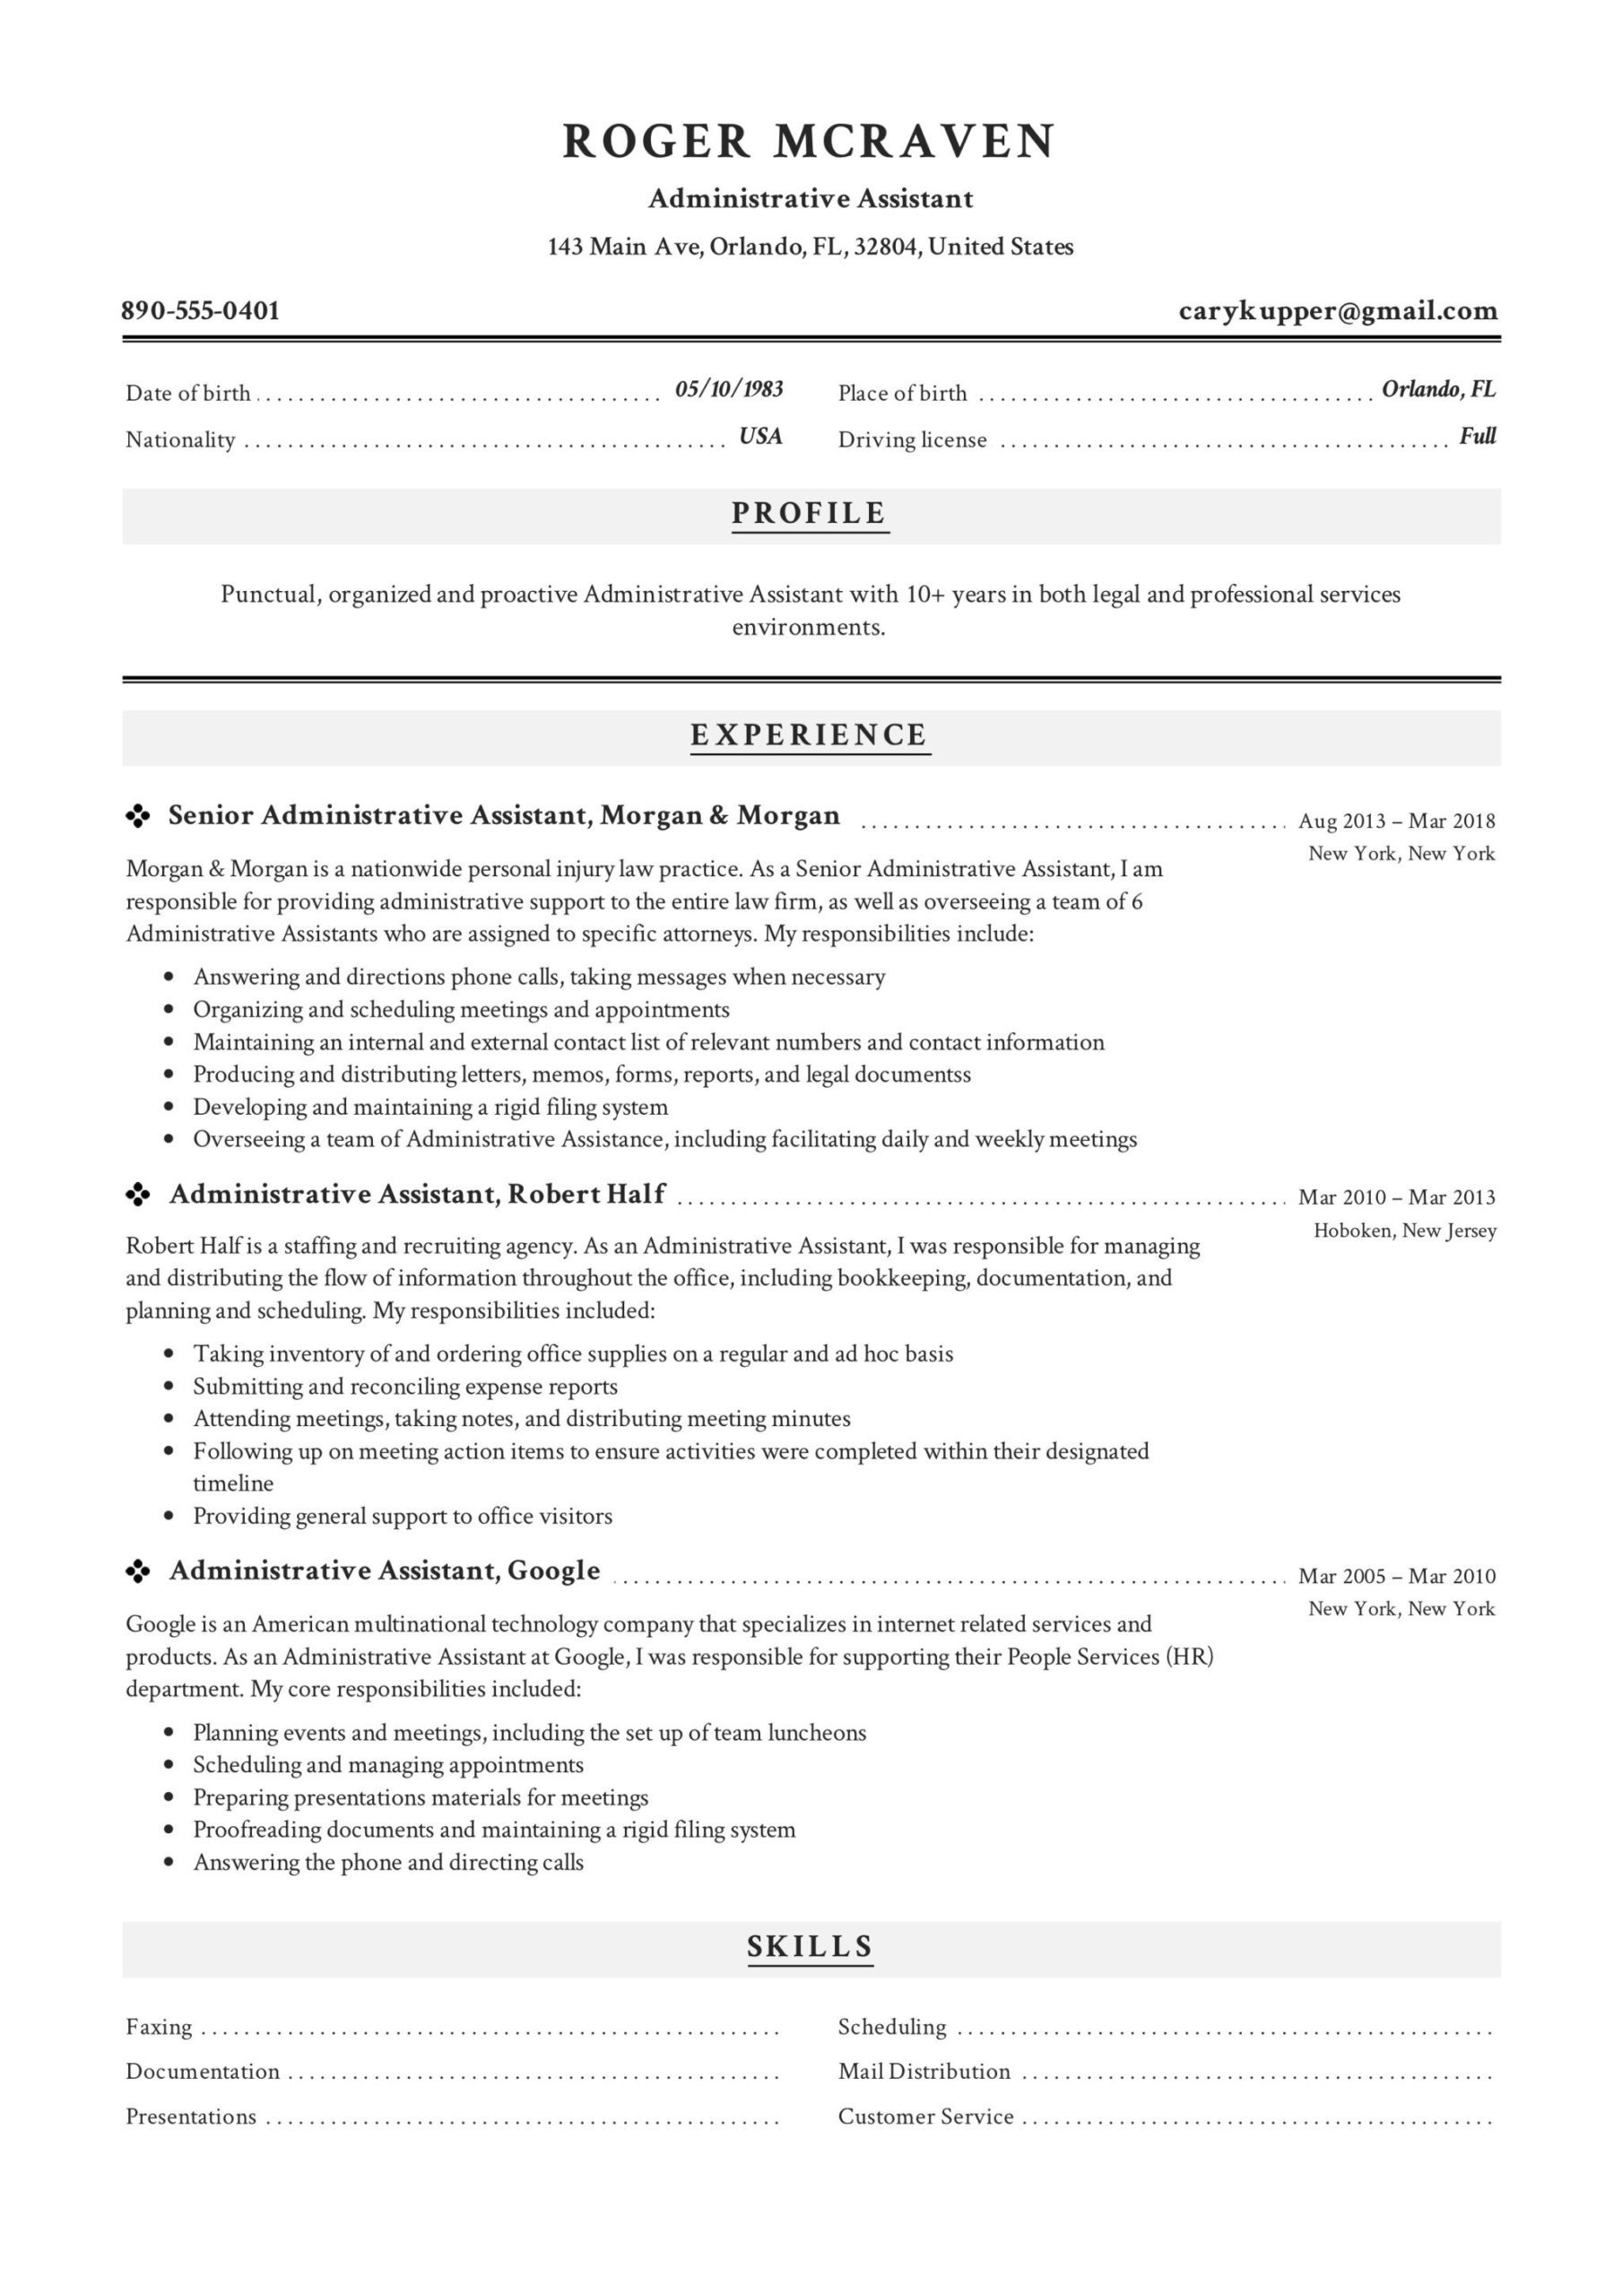 Sample Skills for Administrative assistant Resume 19 Administrative assistant Resumes & Guide Pdf 2022